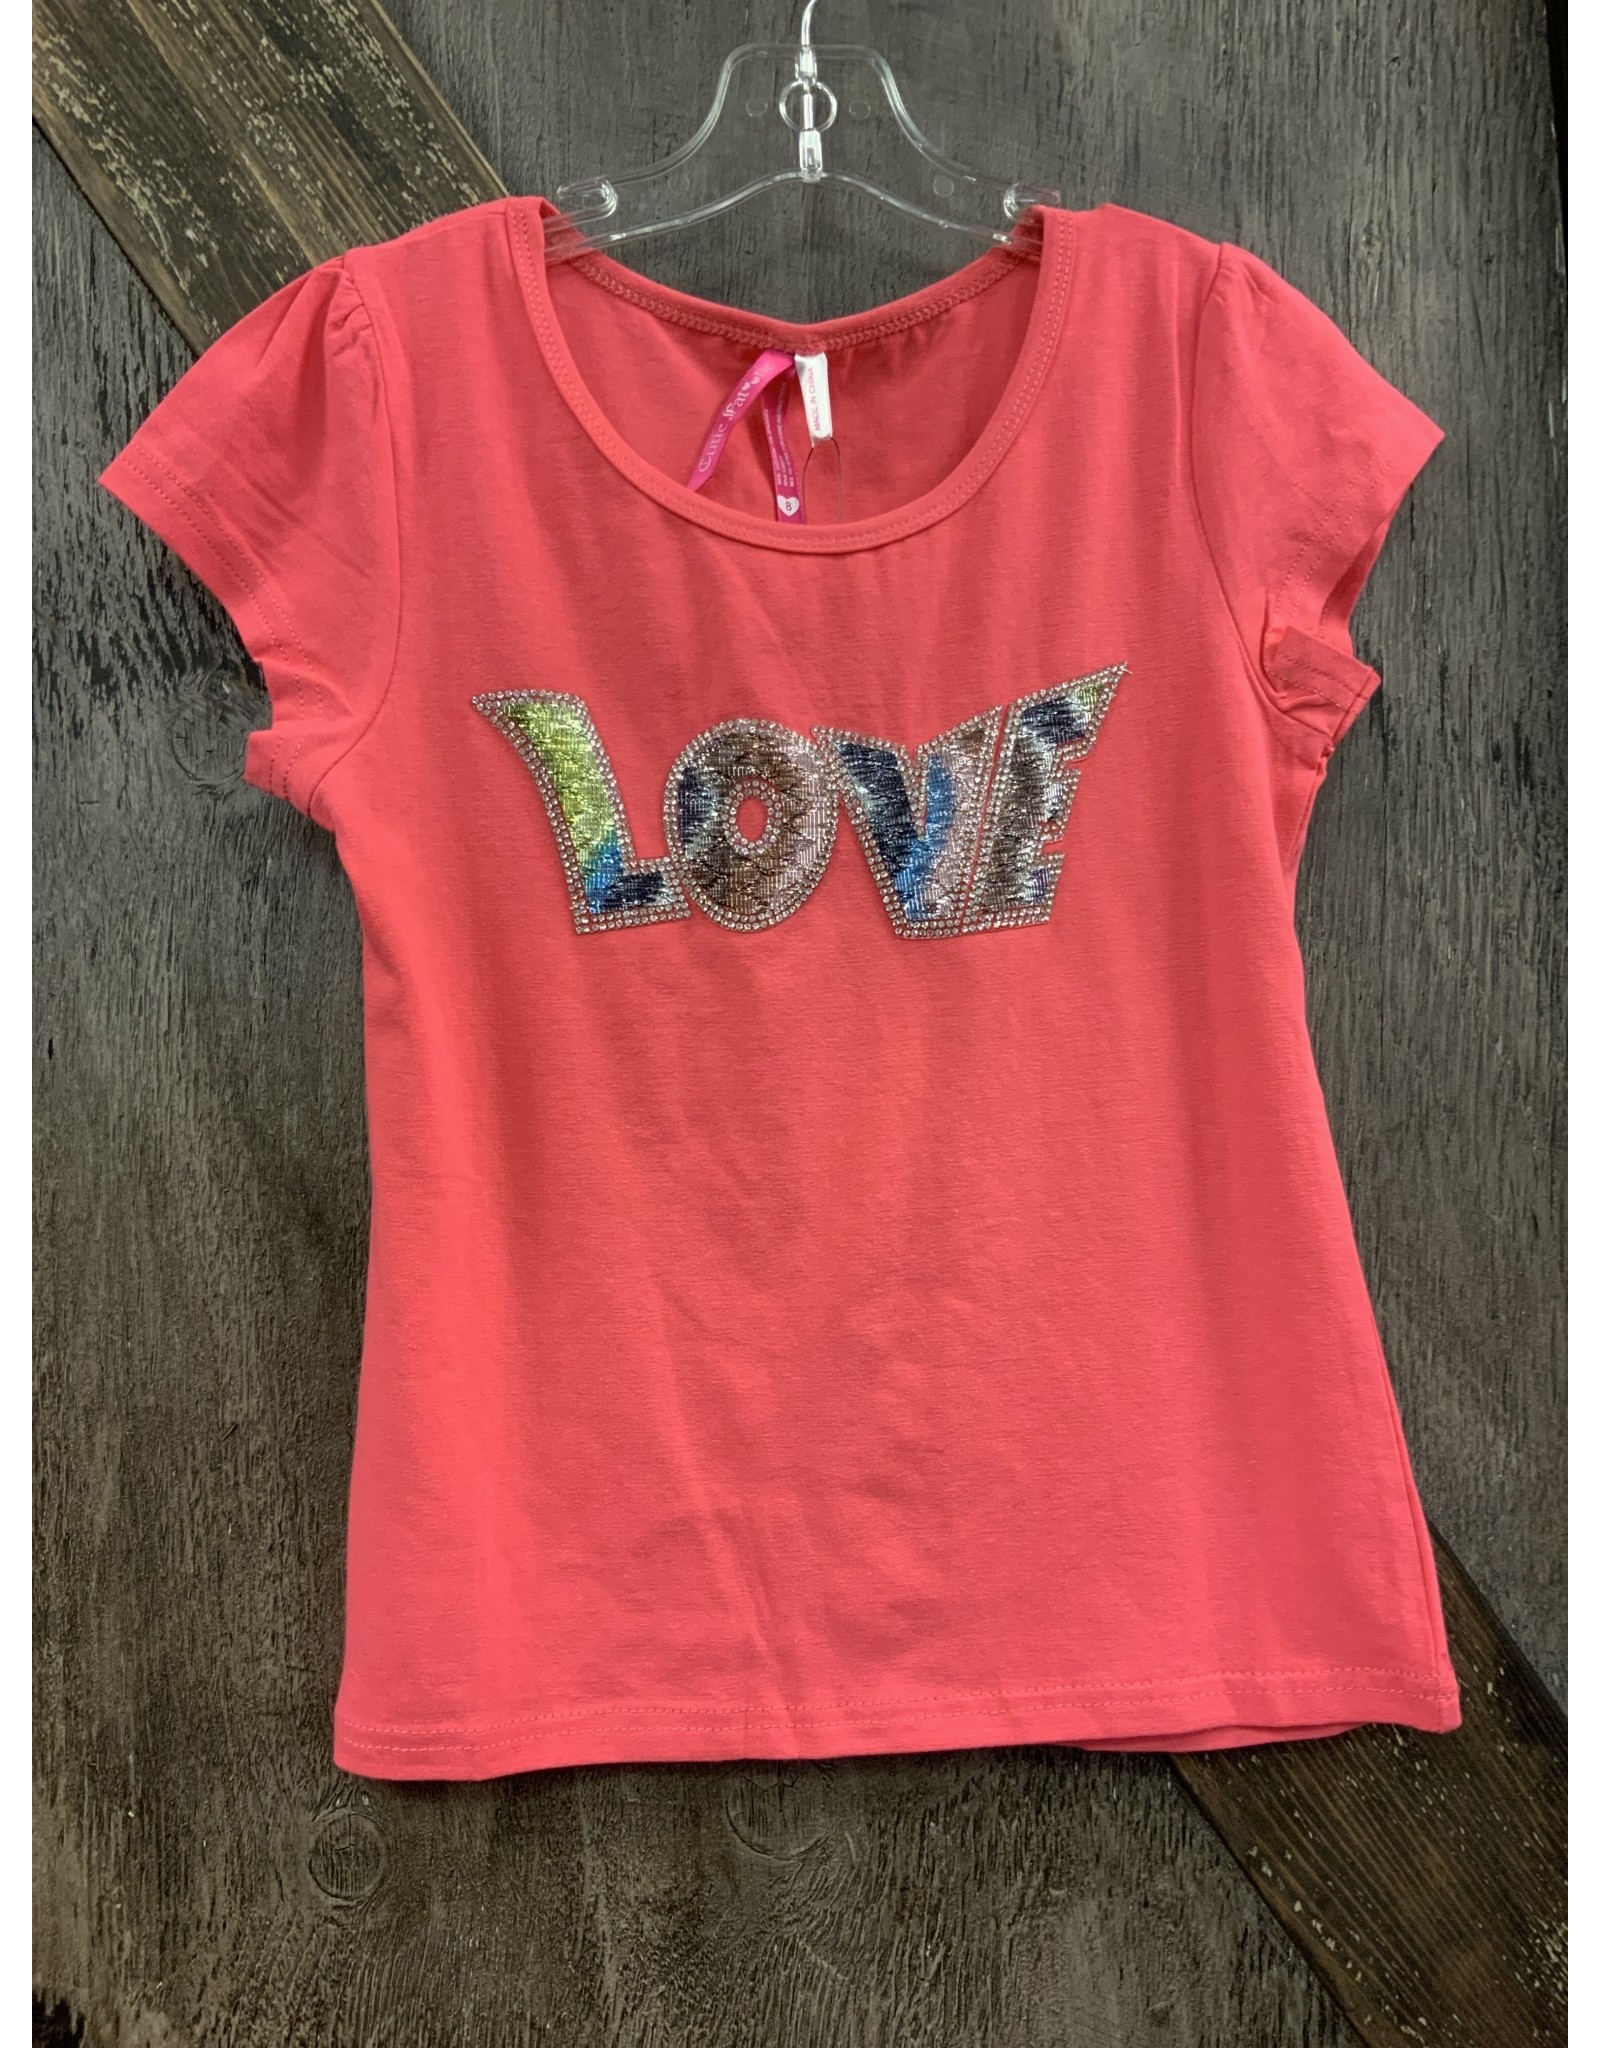 GIRL’S CORAL LOVE PATCH SHIRT